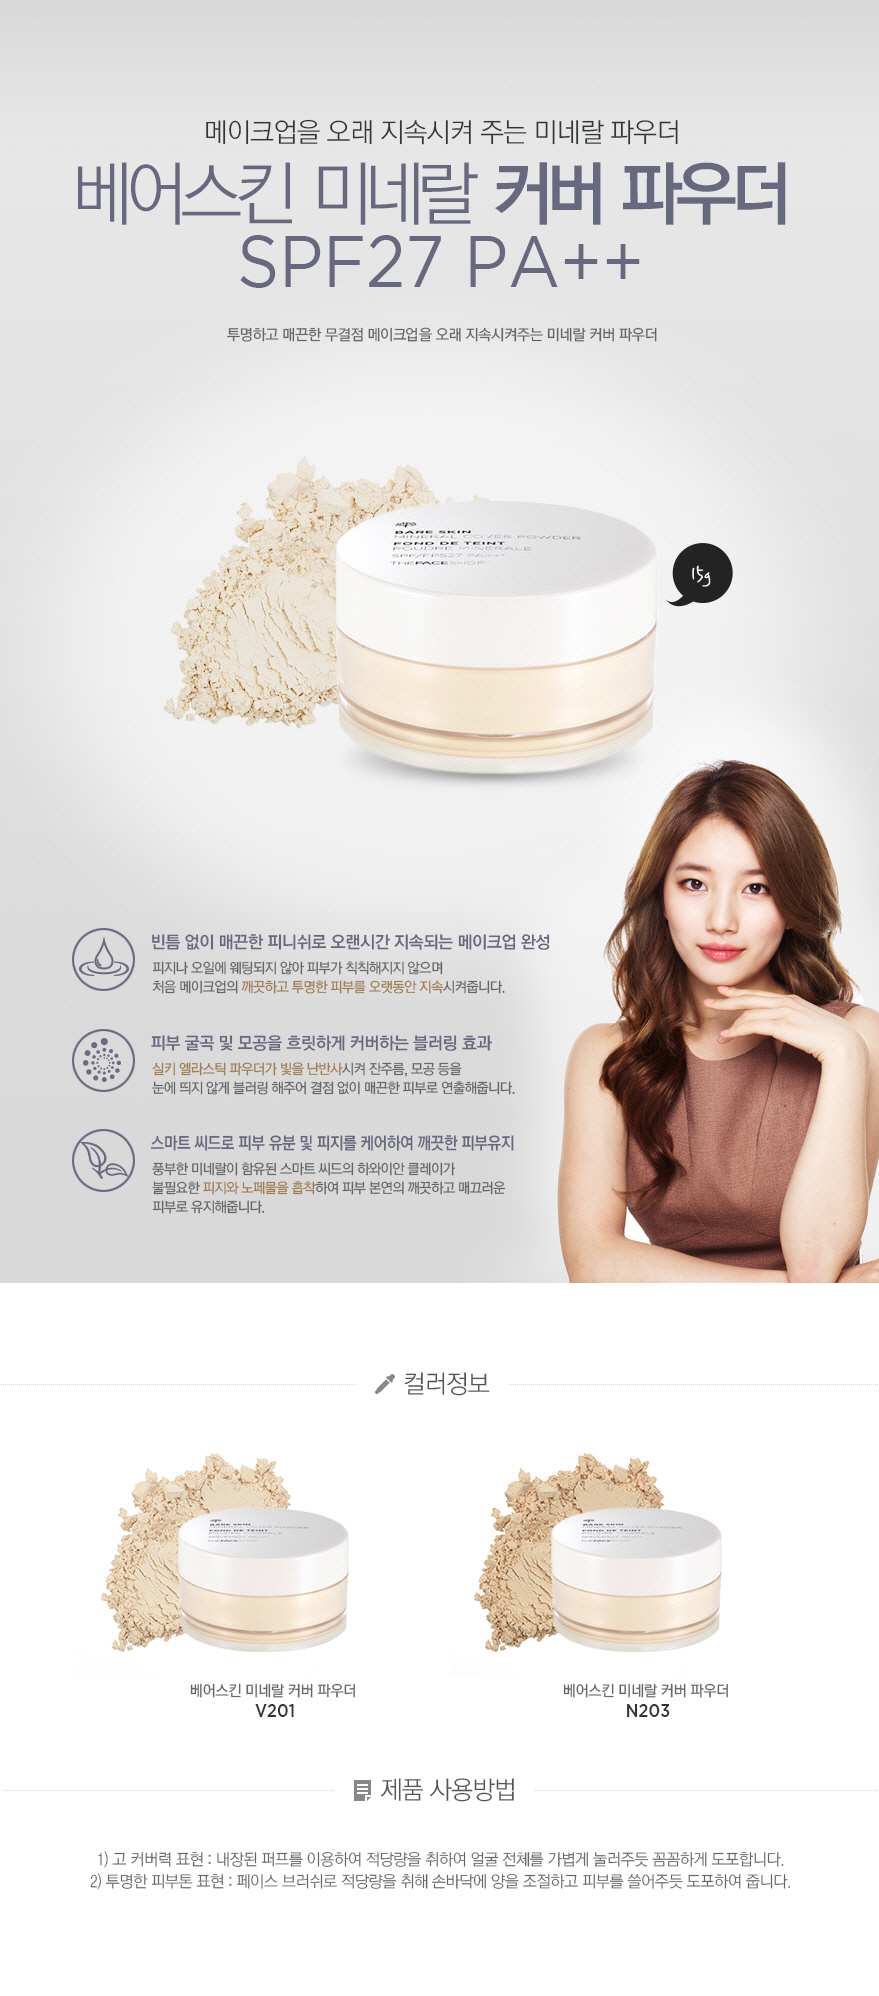 [The Face Shop] Bare Skin Mineral Cover Powder SPF27 PA++ V201 Apricot Beige